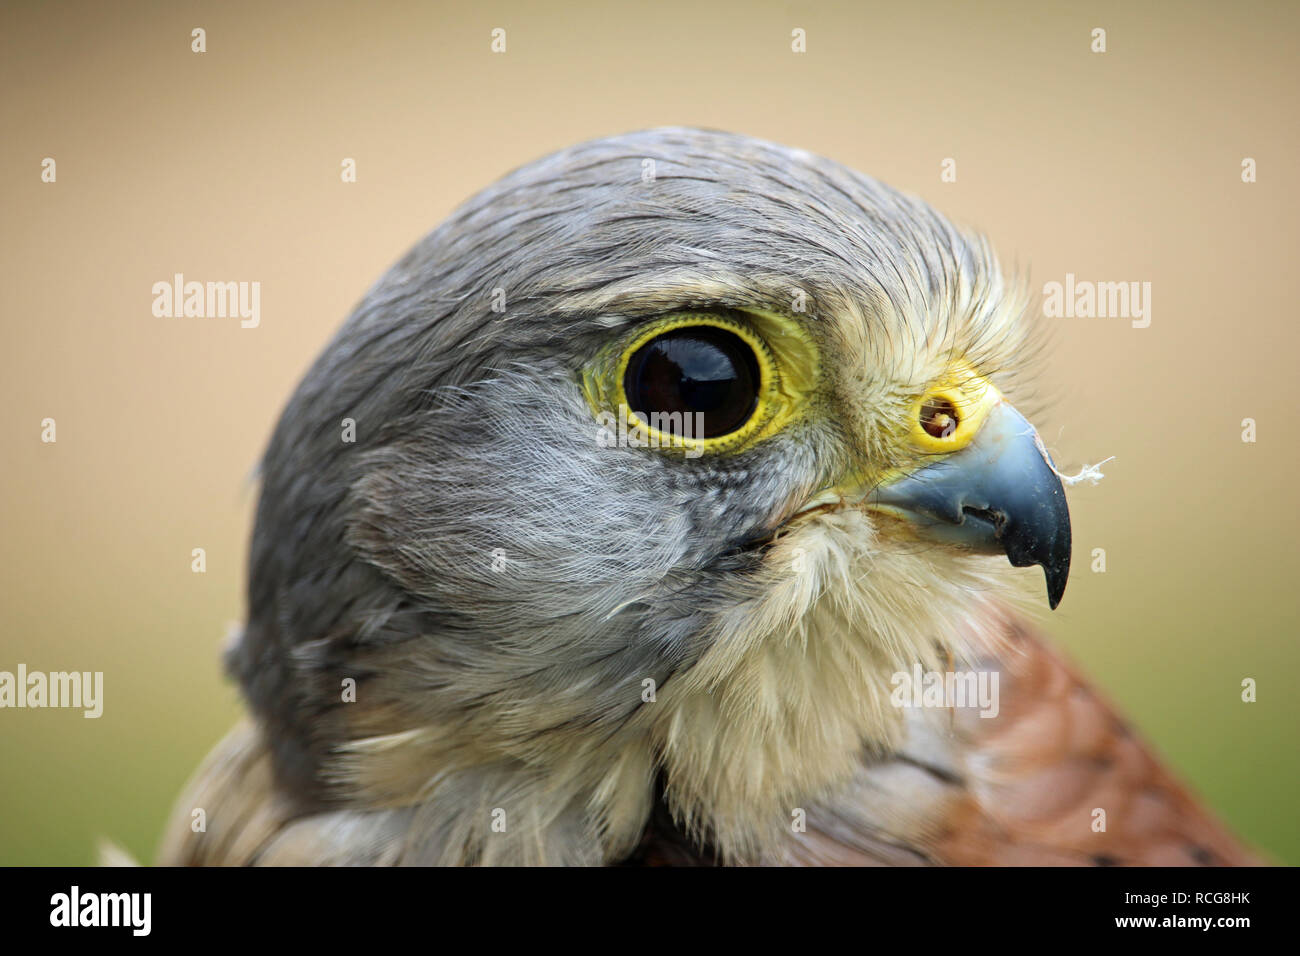 Head and shoulders of a kestrel (Falco tinnunculus) facing right with a green and brown blurred background. Stock Photo